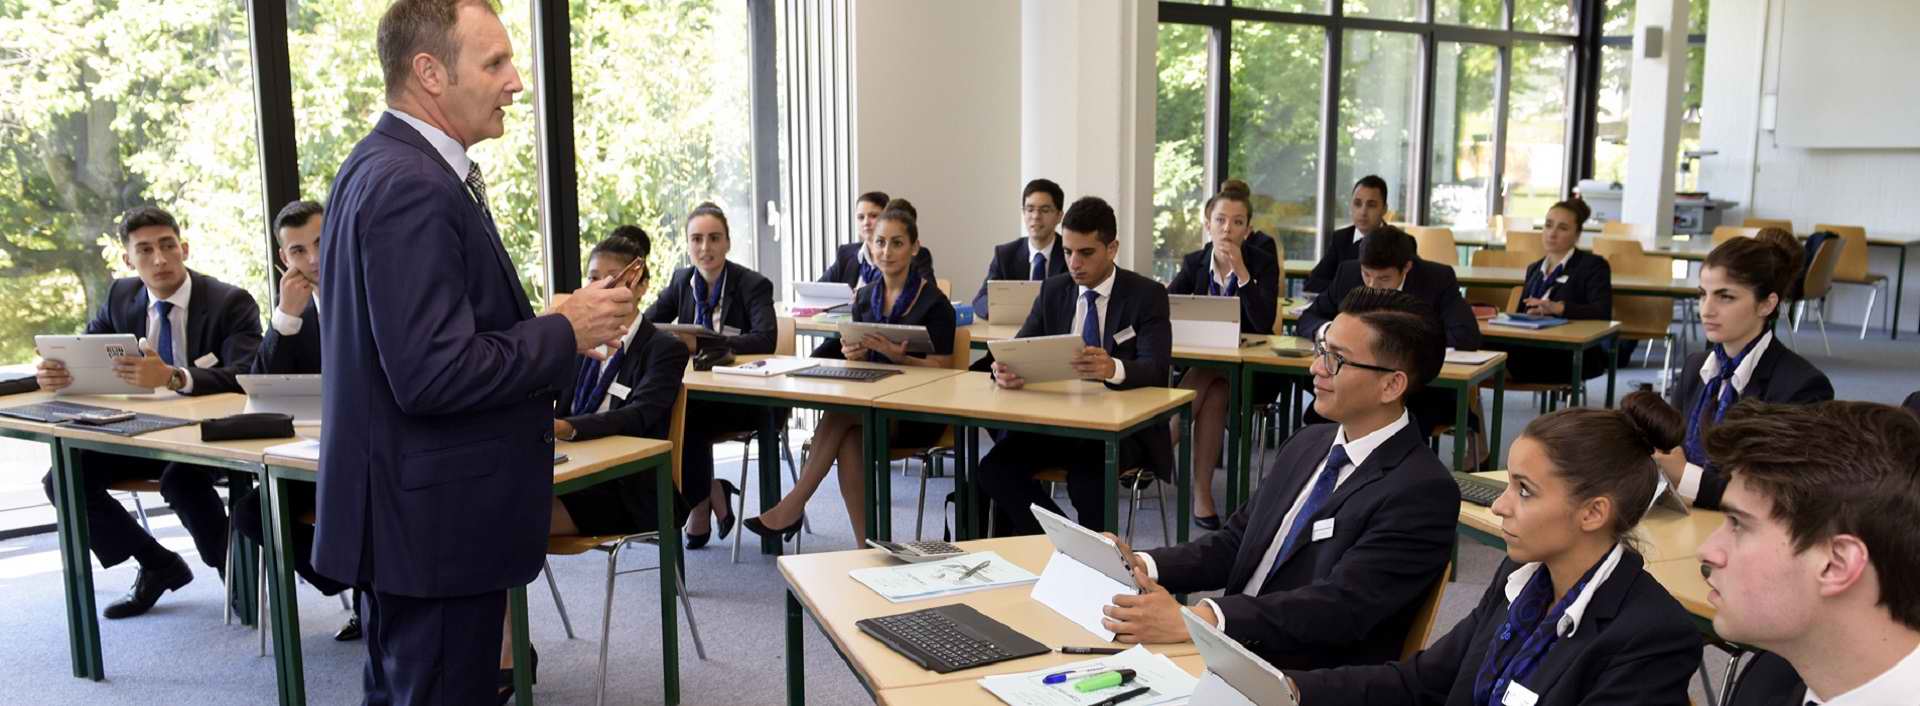 Enroll at the hotel management school Geneva means taking the first step towards a professional career in a sector that is constantly growing and offers countless opportunities around the world.